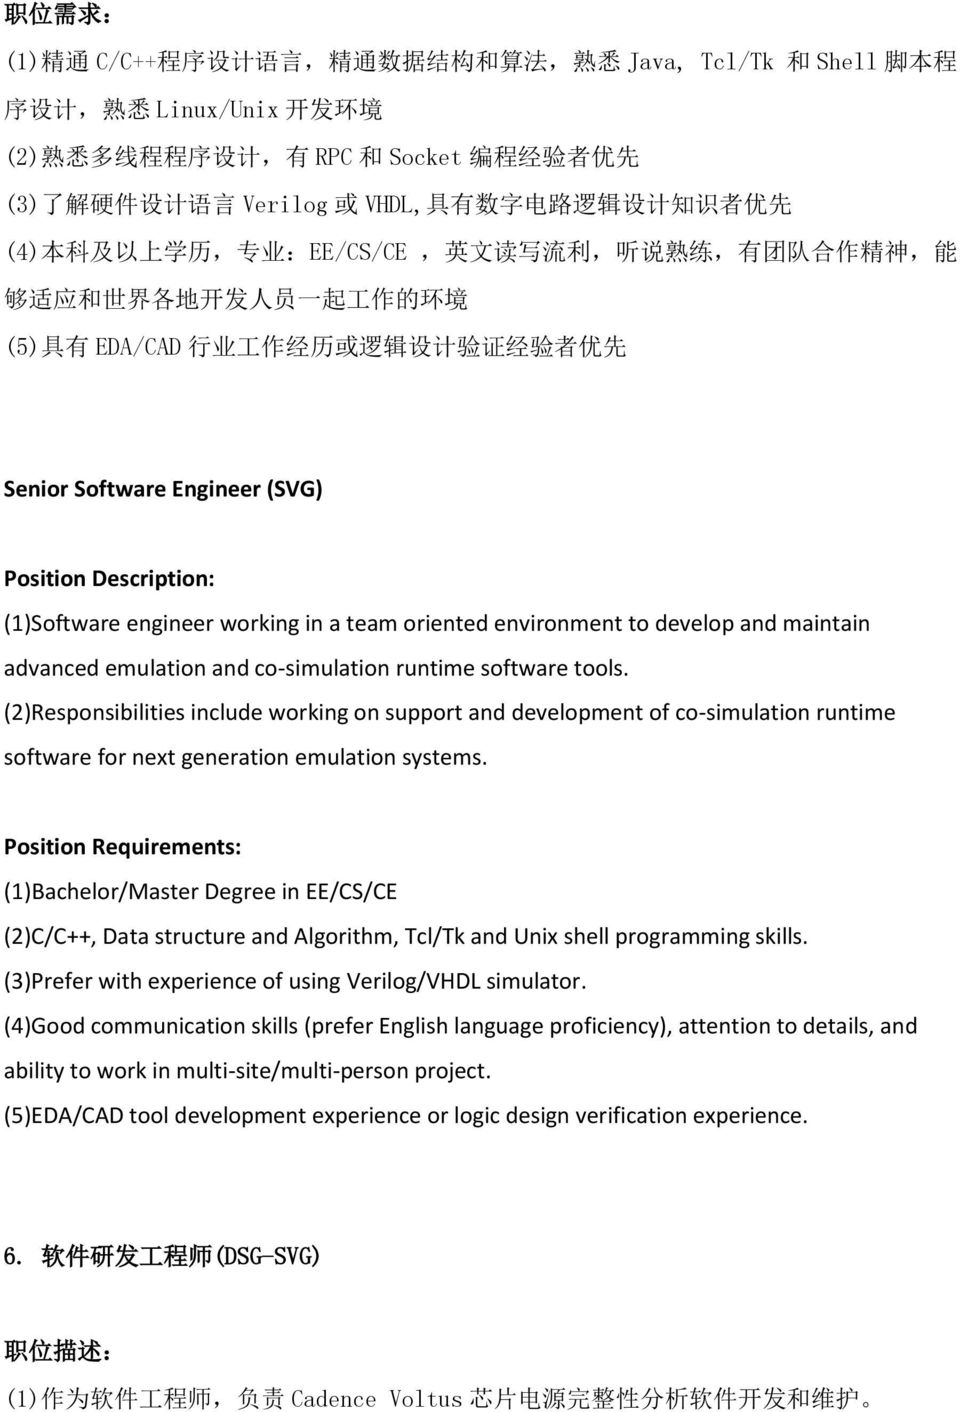 Senior Software Engineer (SVG) (1)Software engineer working in a team oriented environment to develop and maintain advanced emulation and co-simulation runtime software tools.